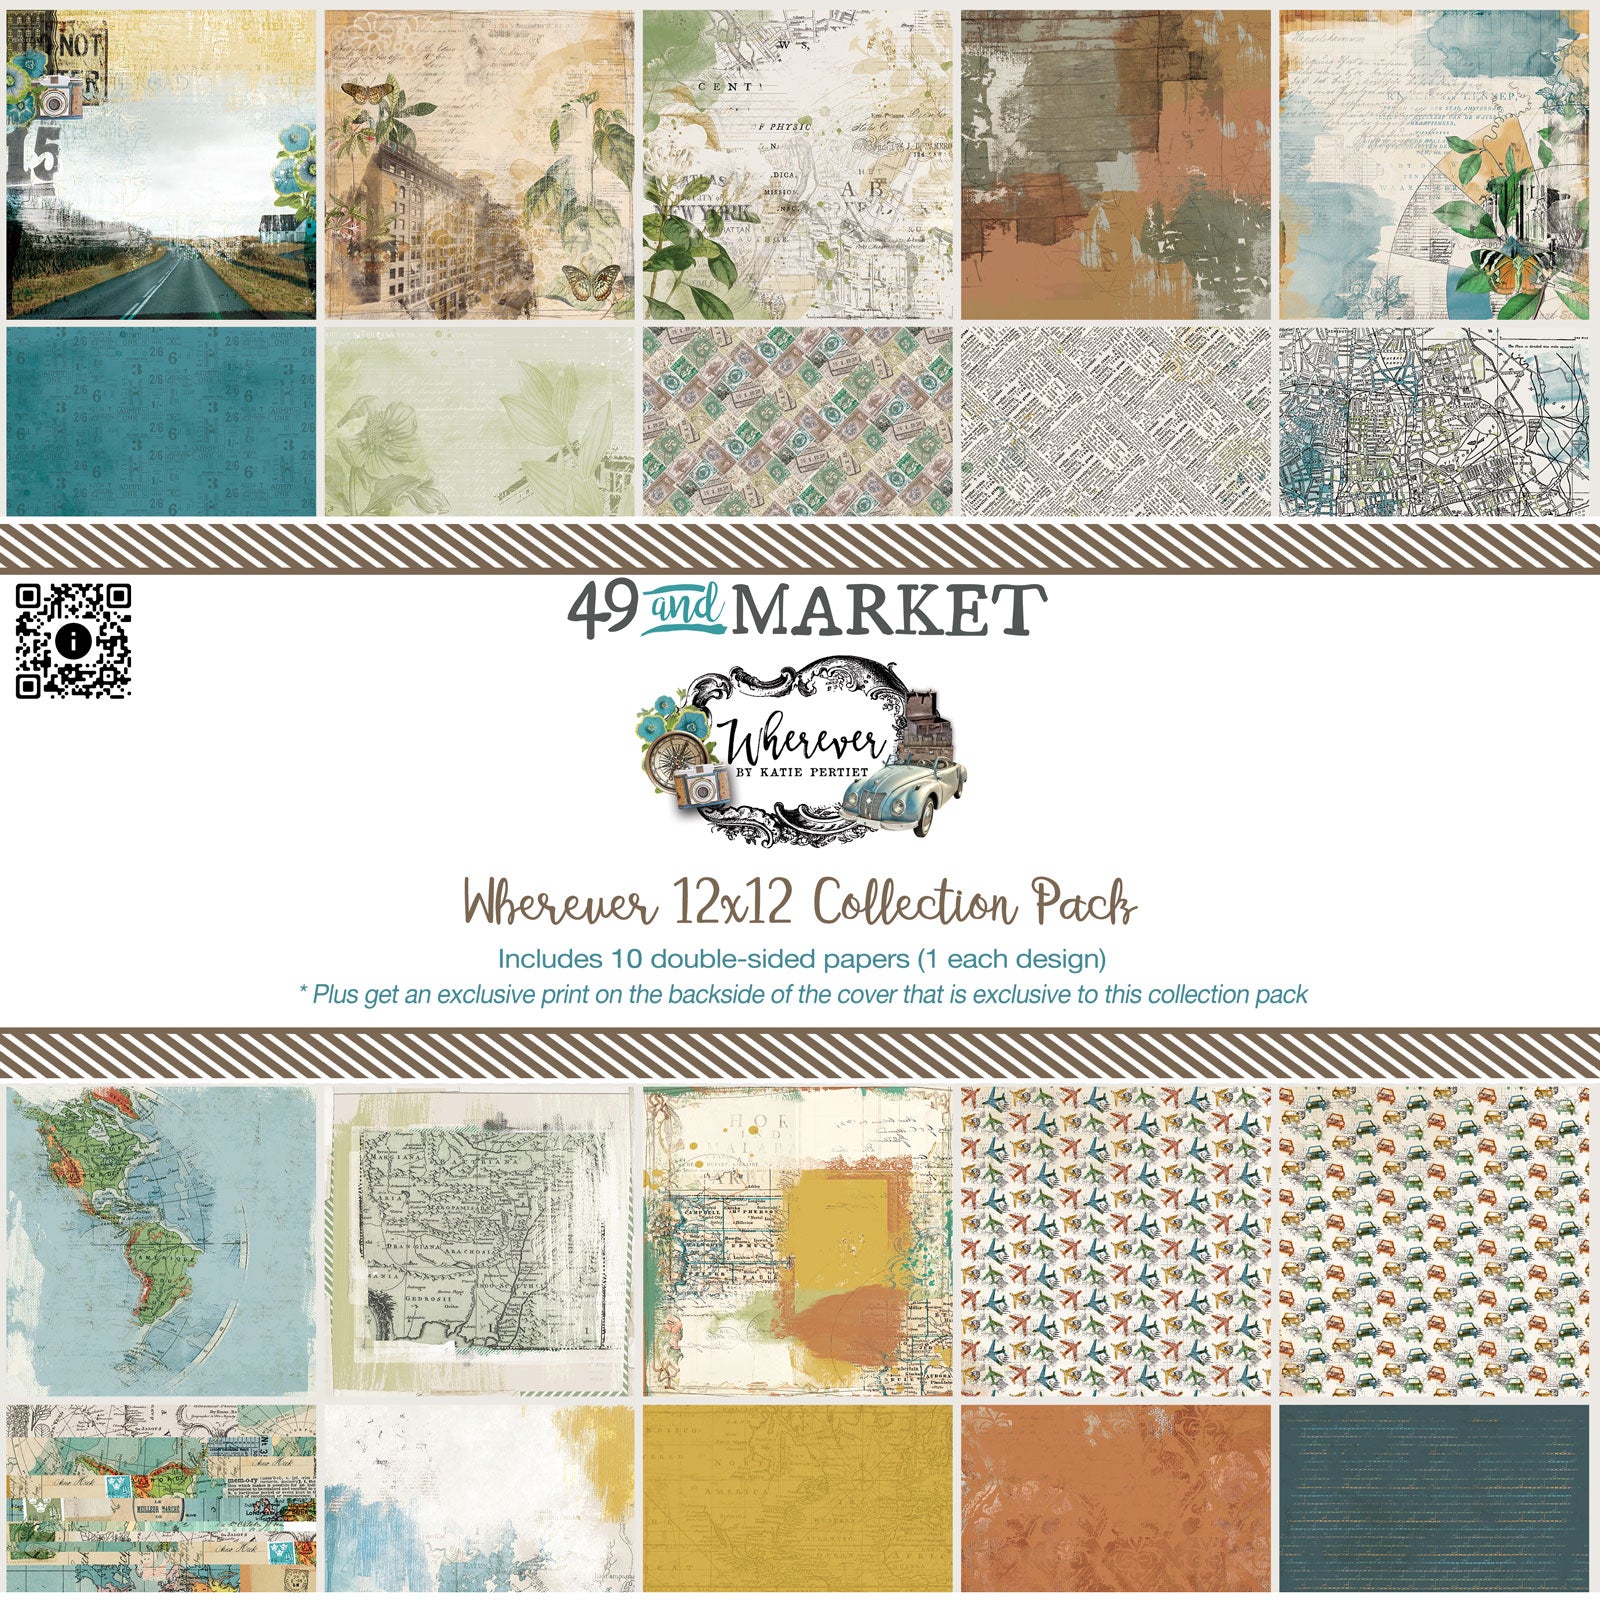 49 & Market Wherever 12x12 Collection Pack